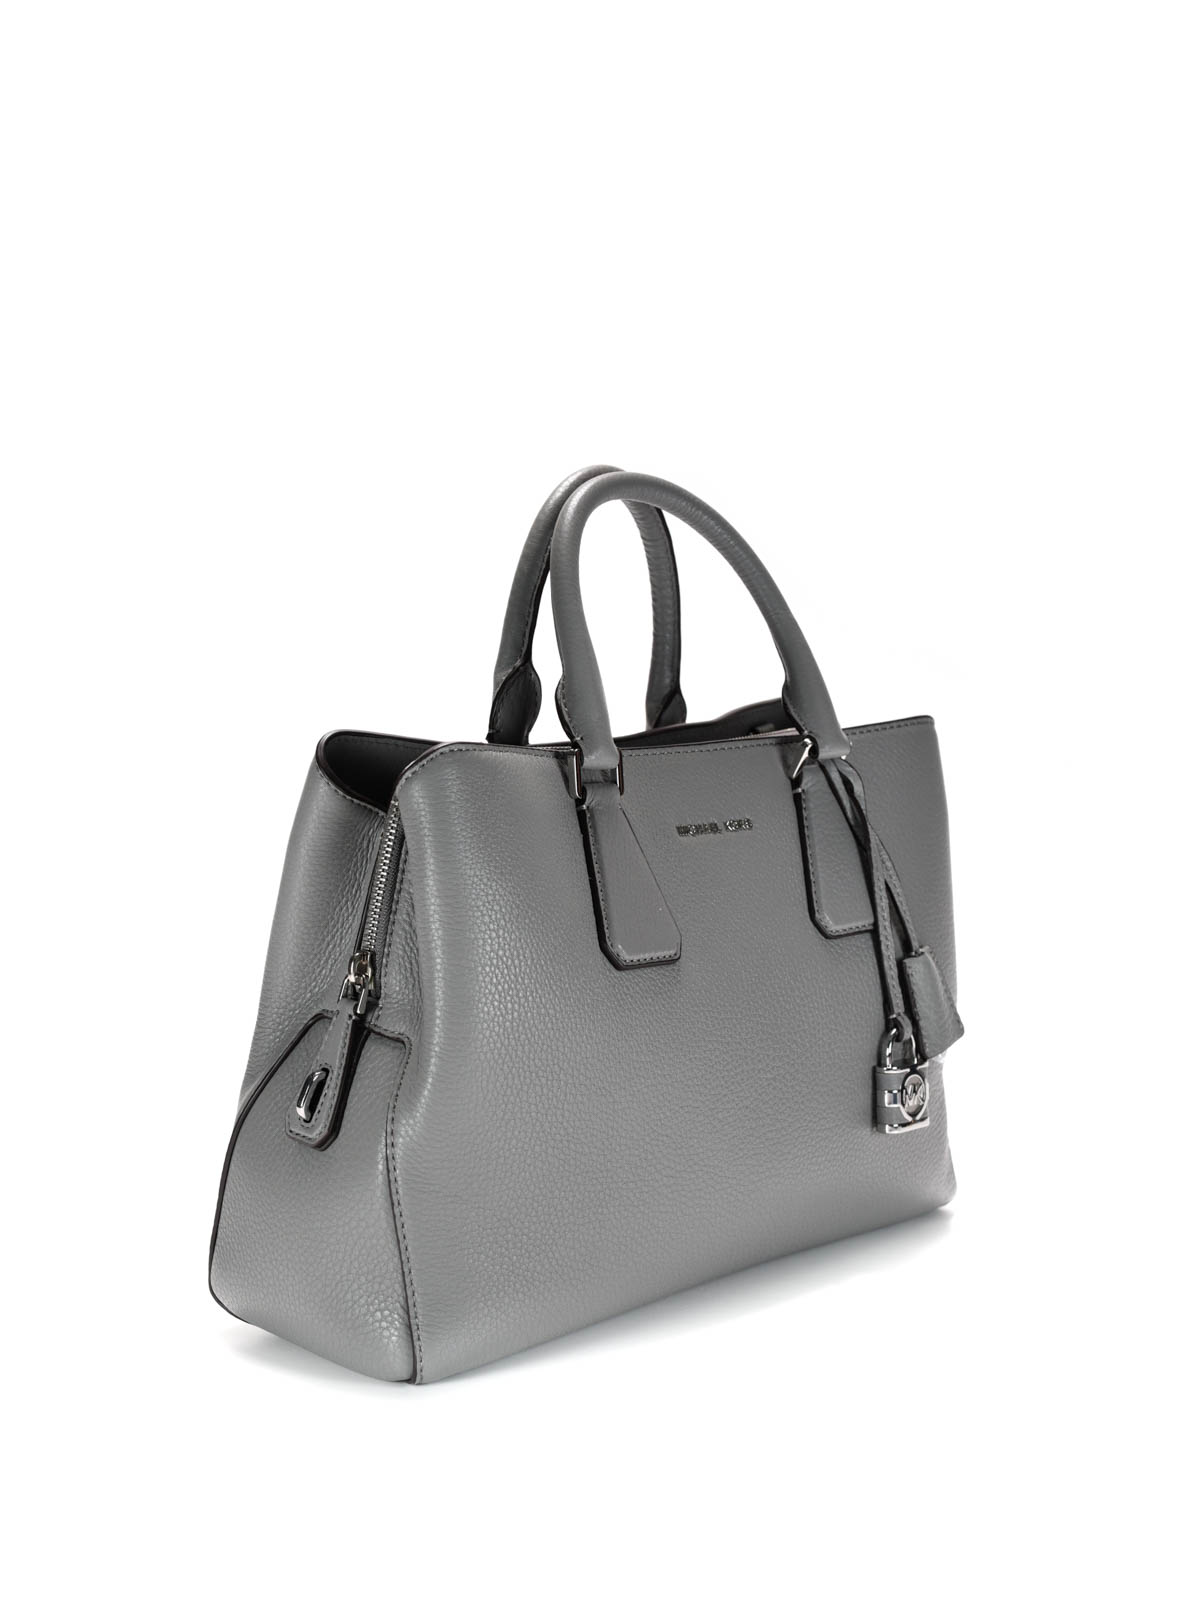 Camille large leather tote by Michael Kors - totes bags | iKRIX